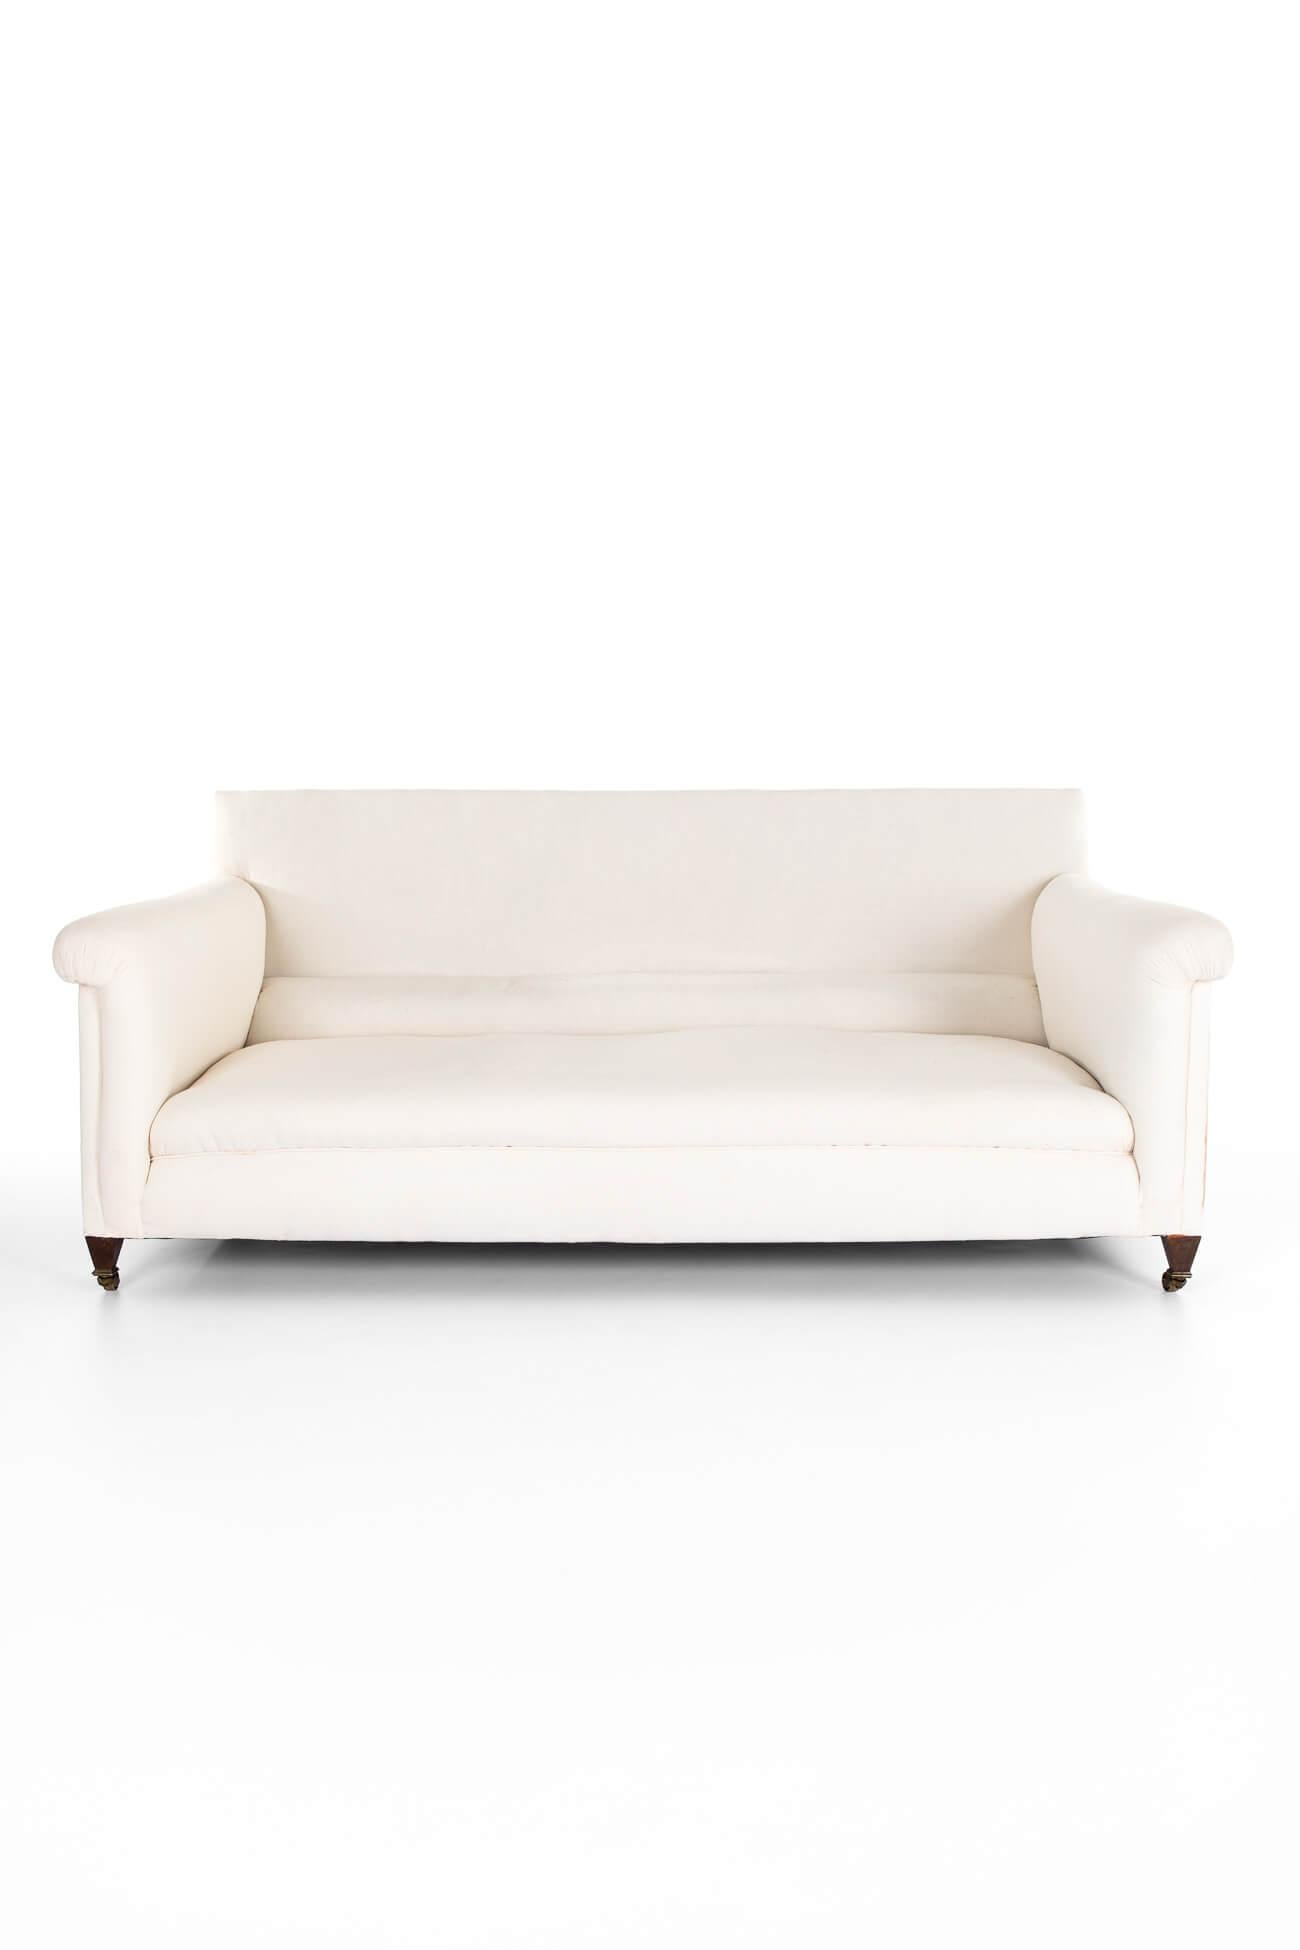 British Large Victorian Country House Sofa For Sale